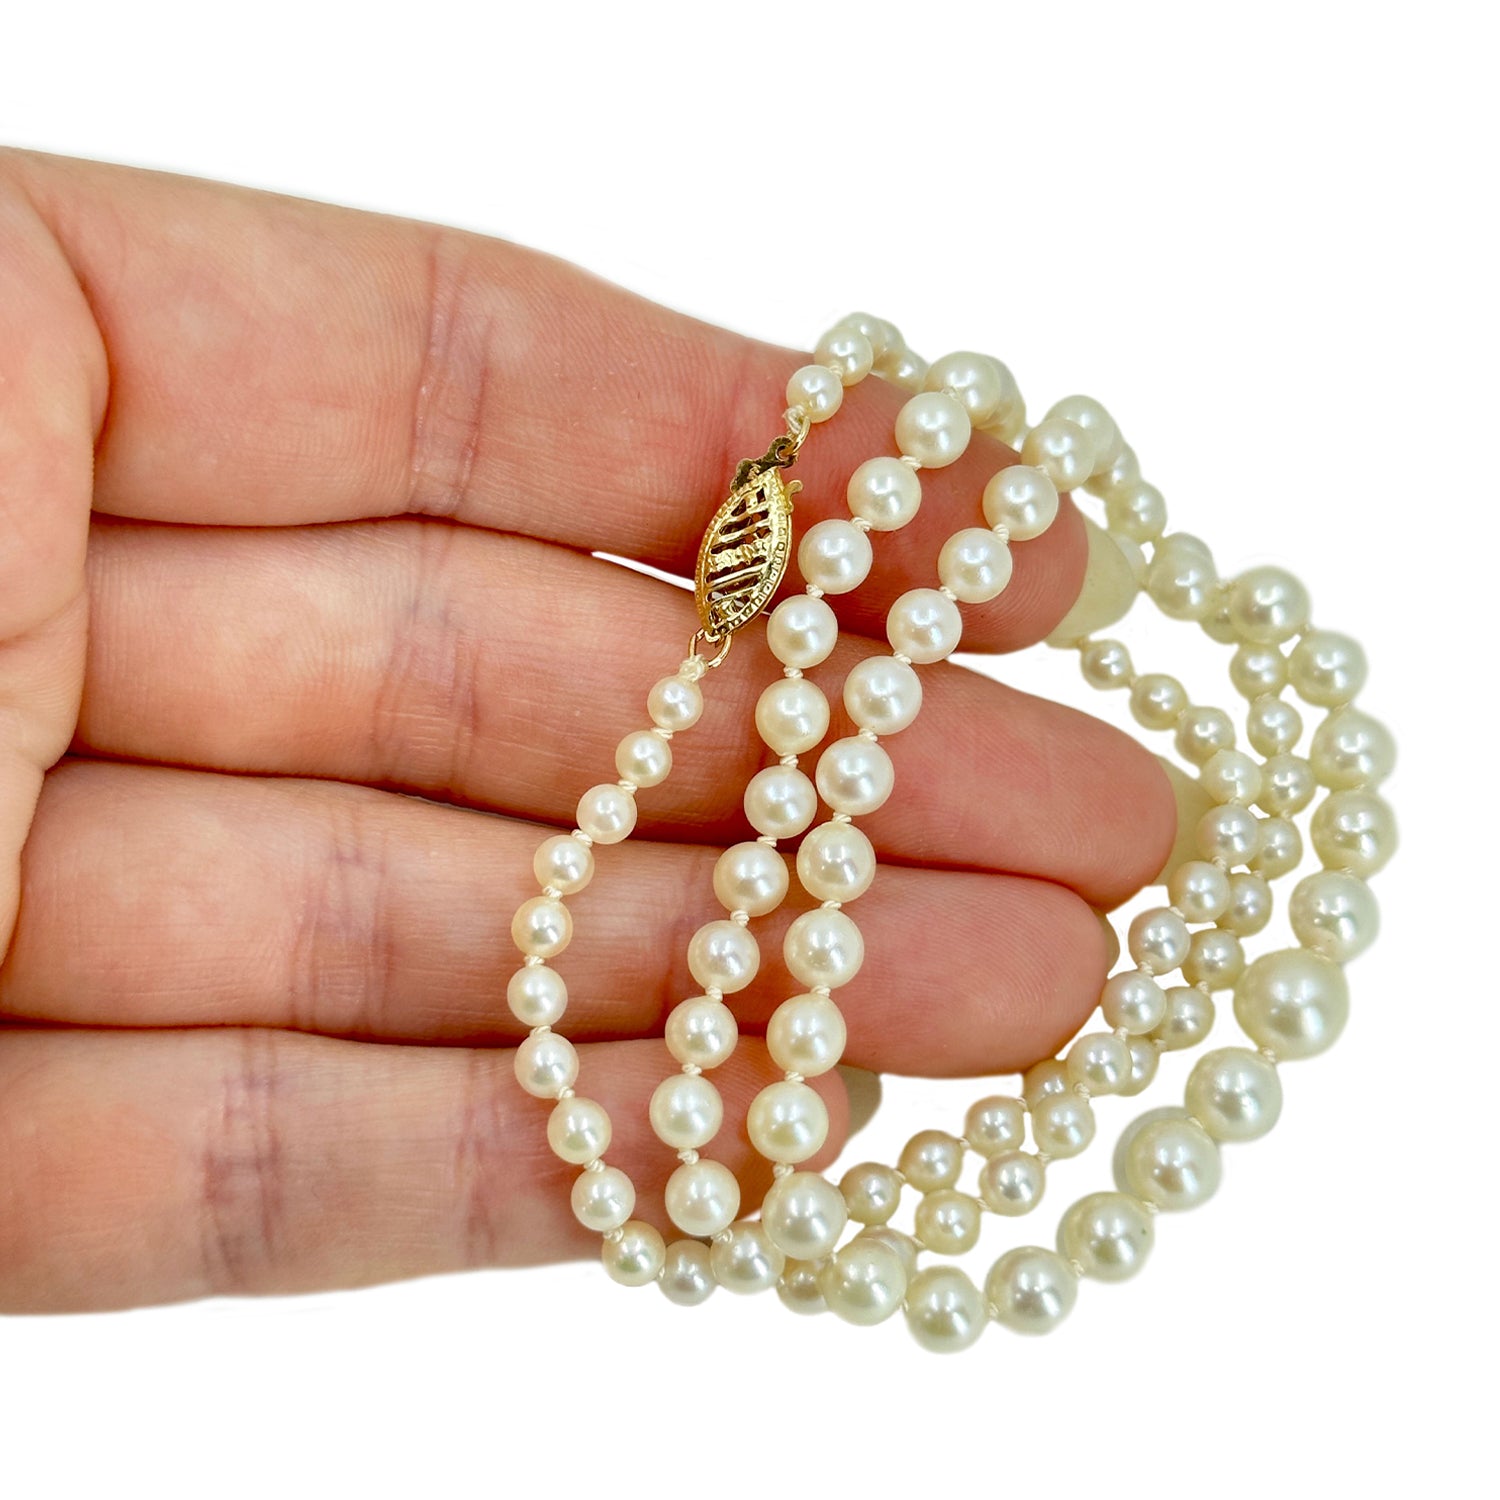 Buy Genuine Handmade Freshwater 20 Inch Full Pearl Necklace Chain, Gold  Silver Chain Necklaces Slightly Irregular Round Pearls Unisex Mens Woman  Online in India - Etsy